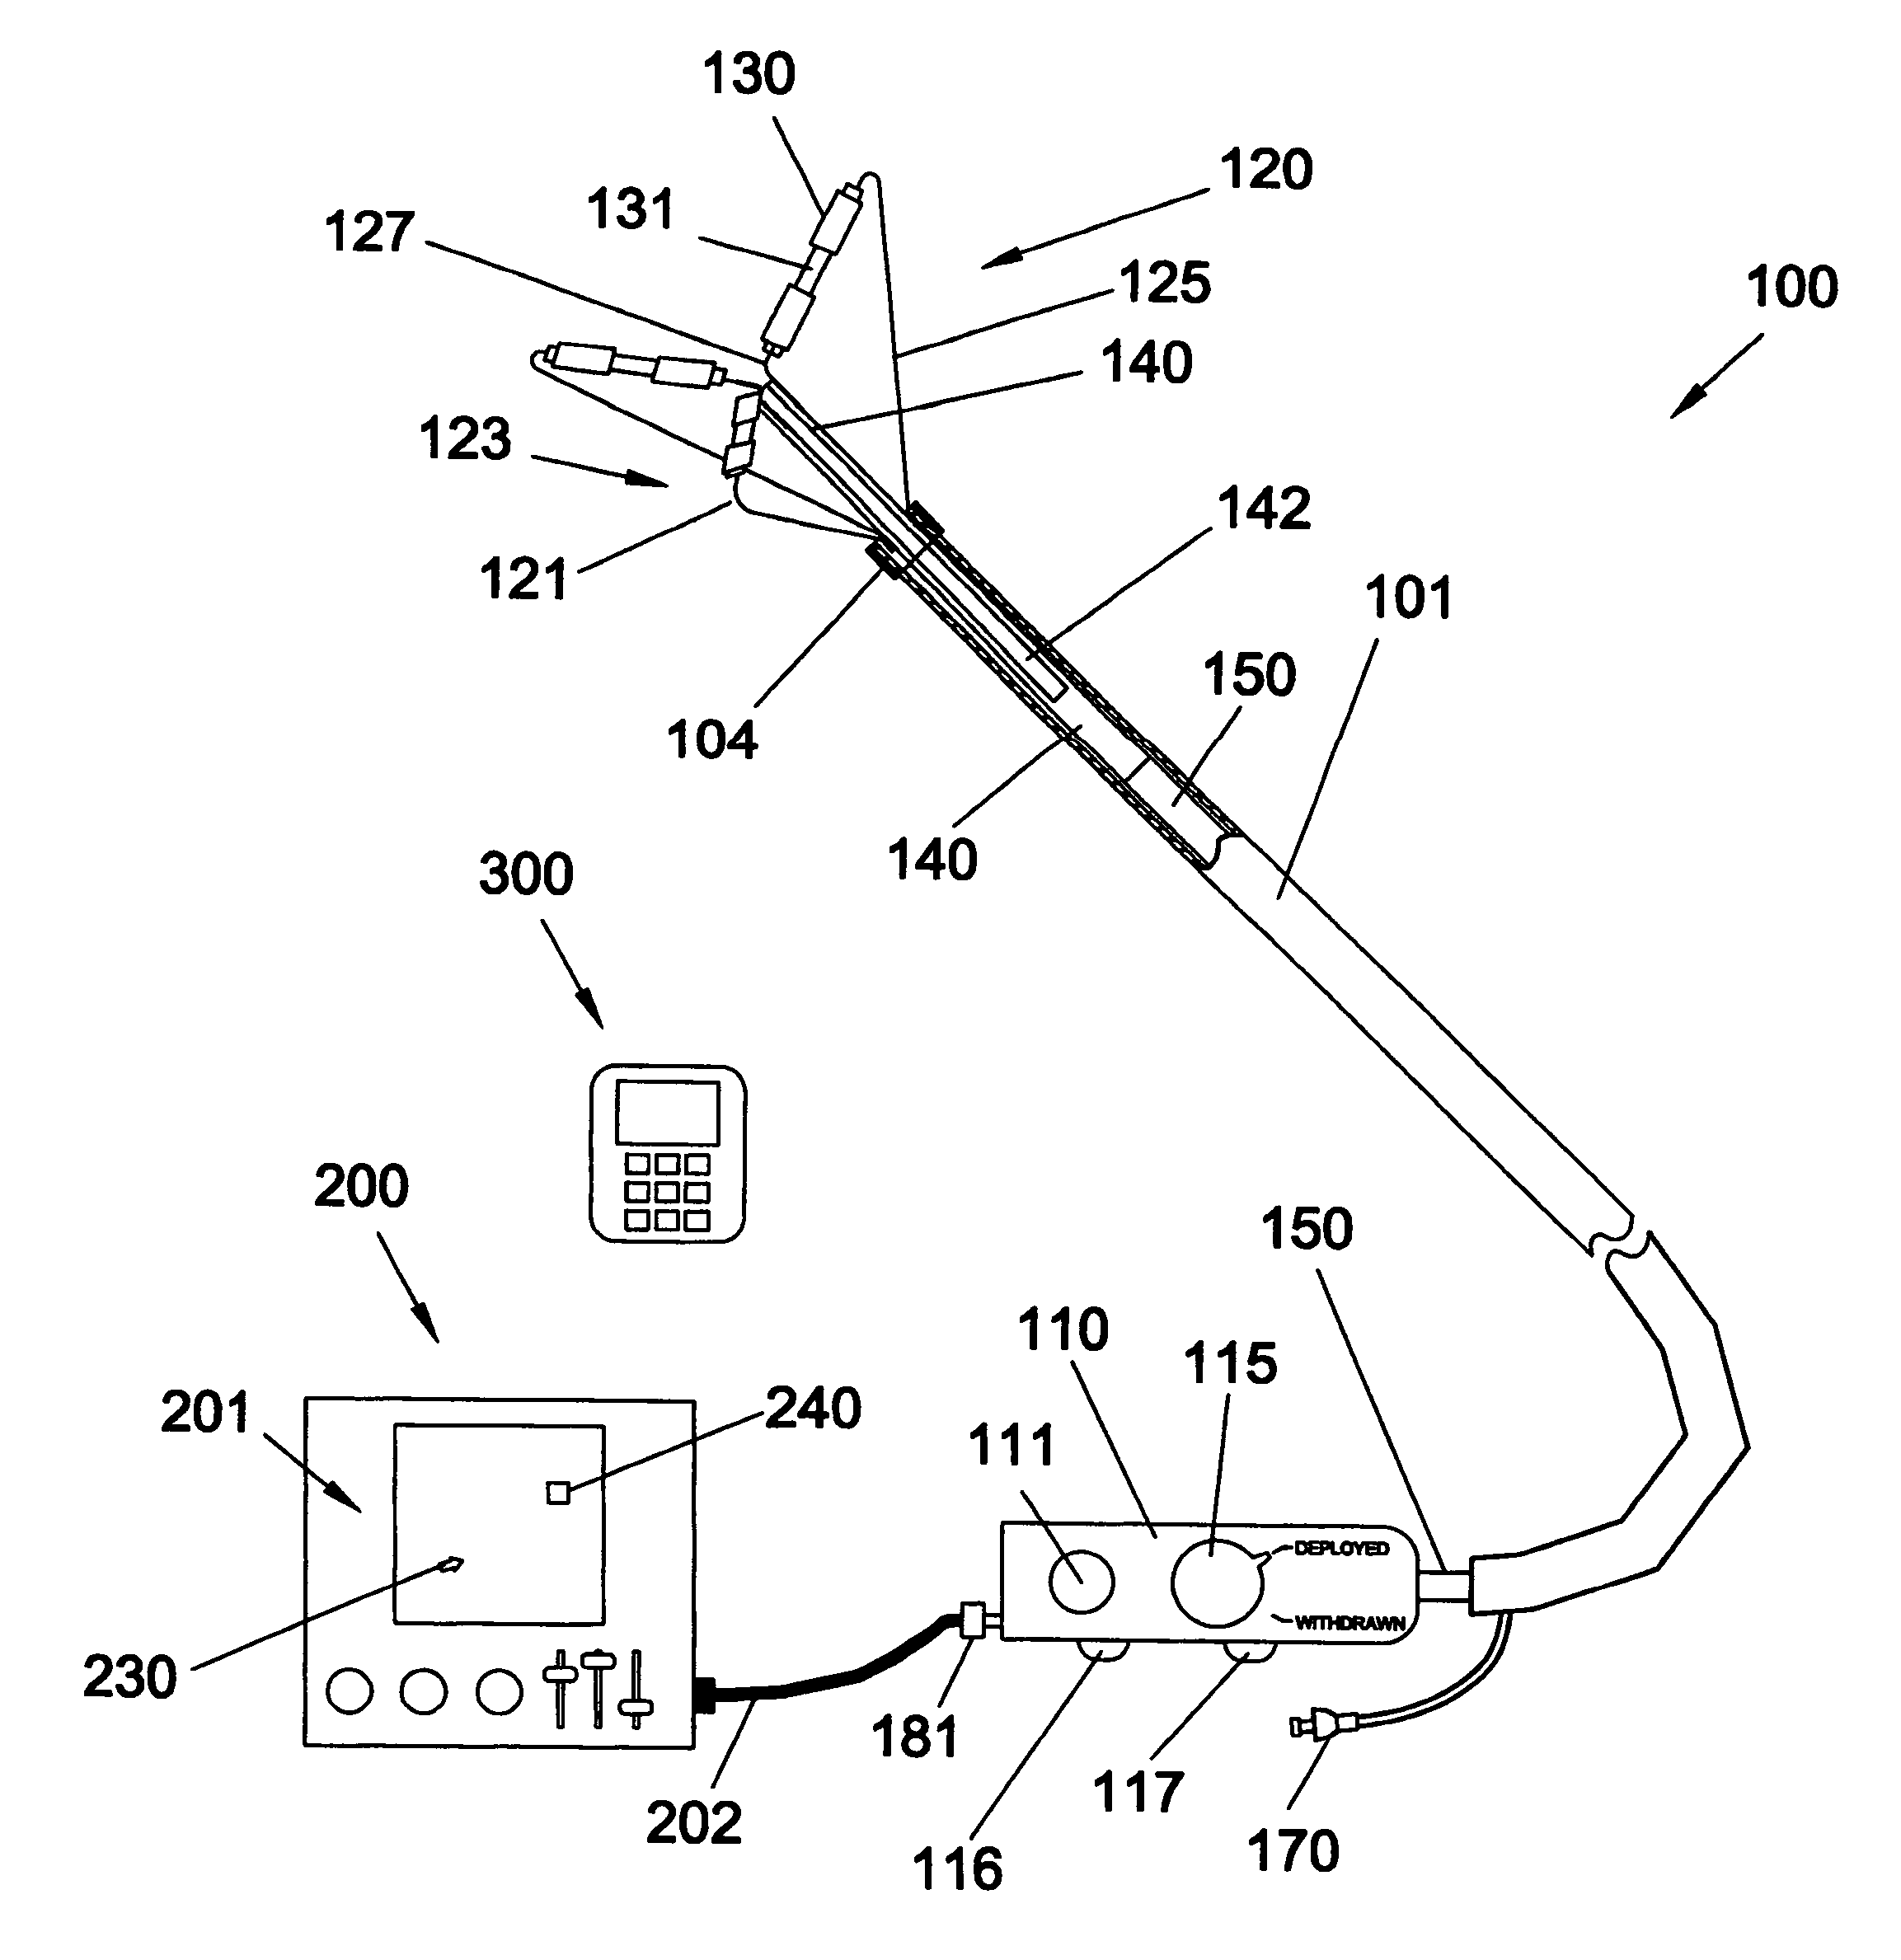 User interface for tissue ablation system